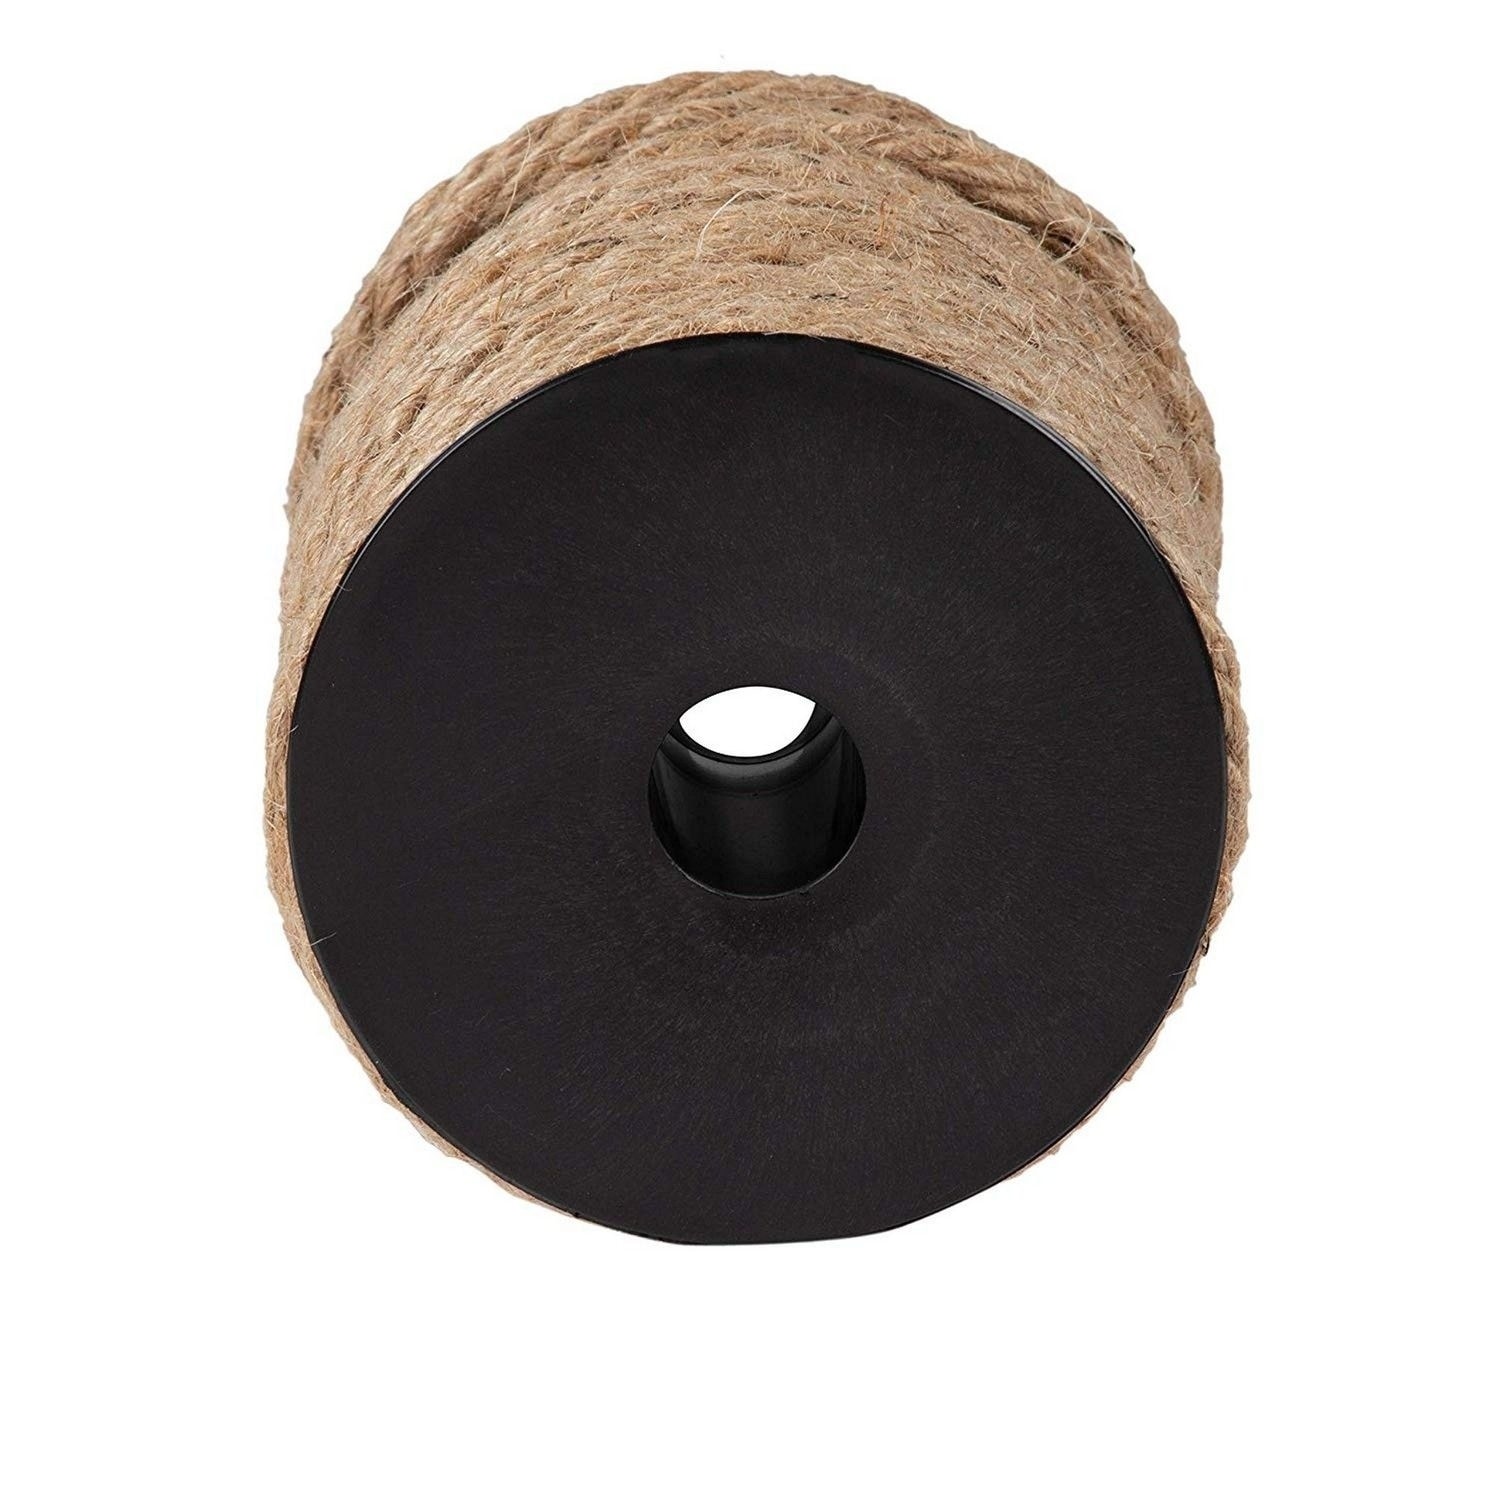 https://ak1.ostkcdn.com/images/products/29713725/5mm-Natural-Jute-Hemp-Rope-Thick-Twine-String-for-DIY-Crafts-Packing-100-Feet-9afde217-cd85-4c99-b8b7-1fadcd445838.jpg